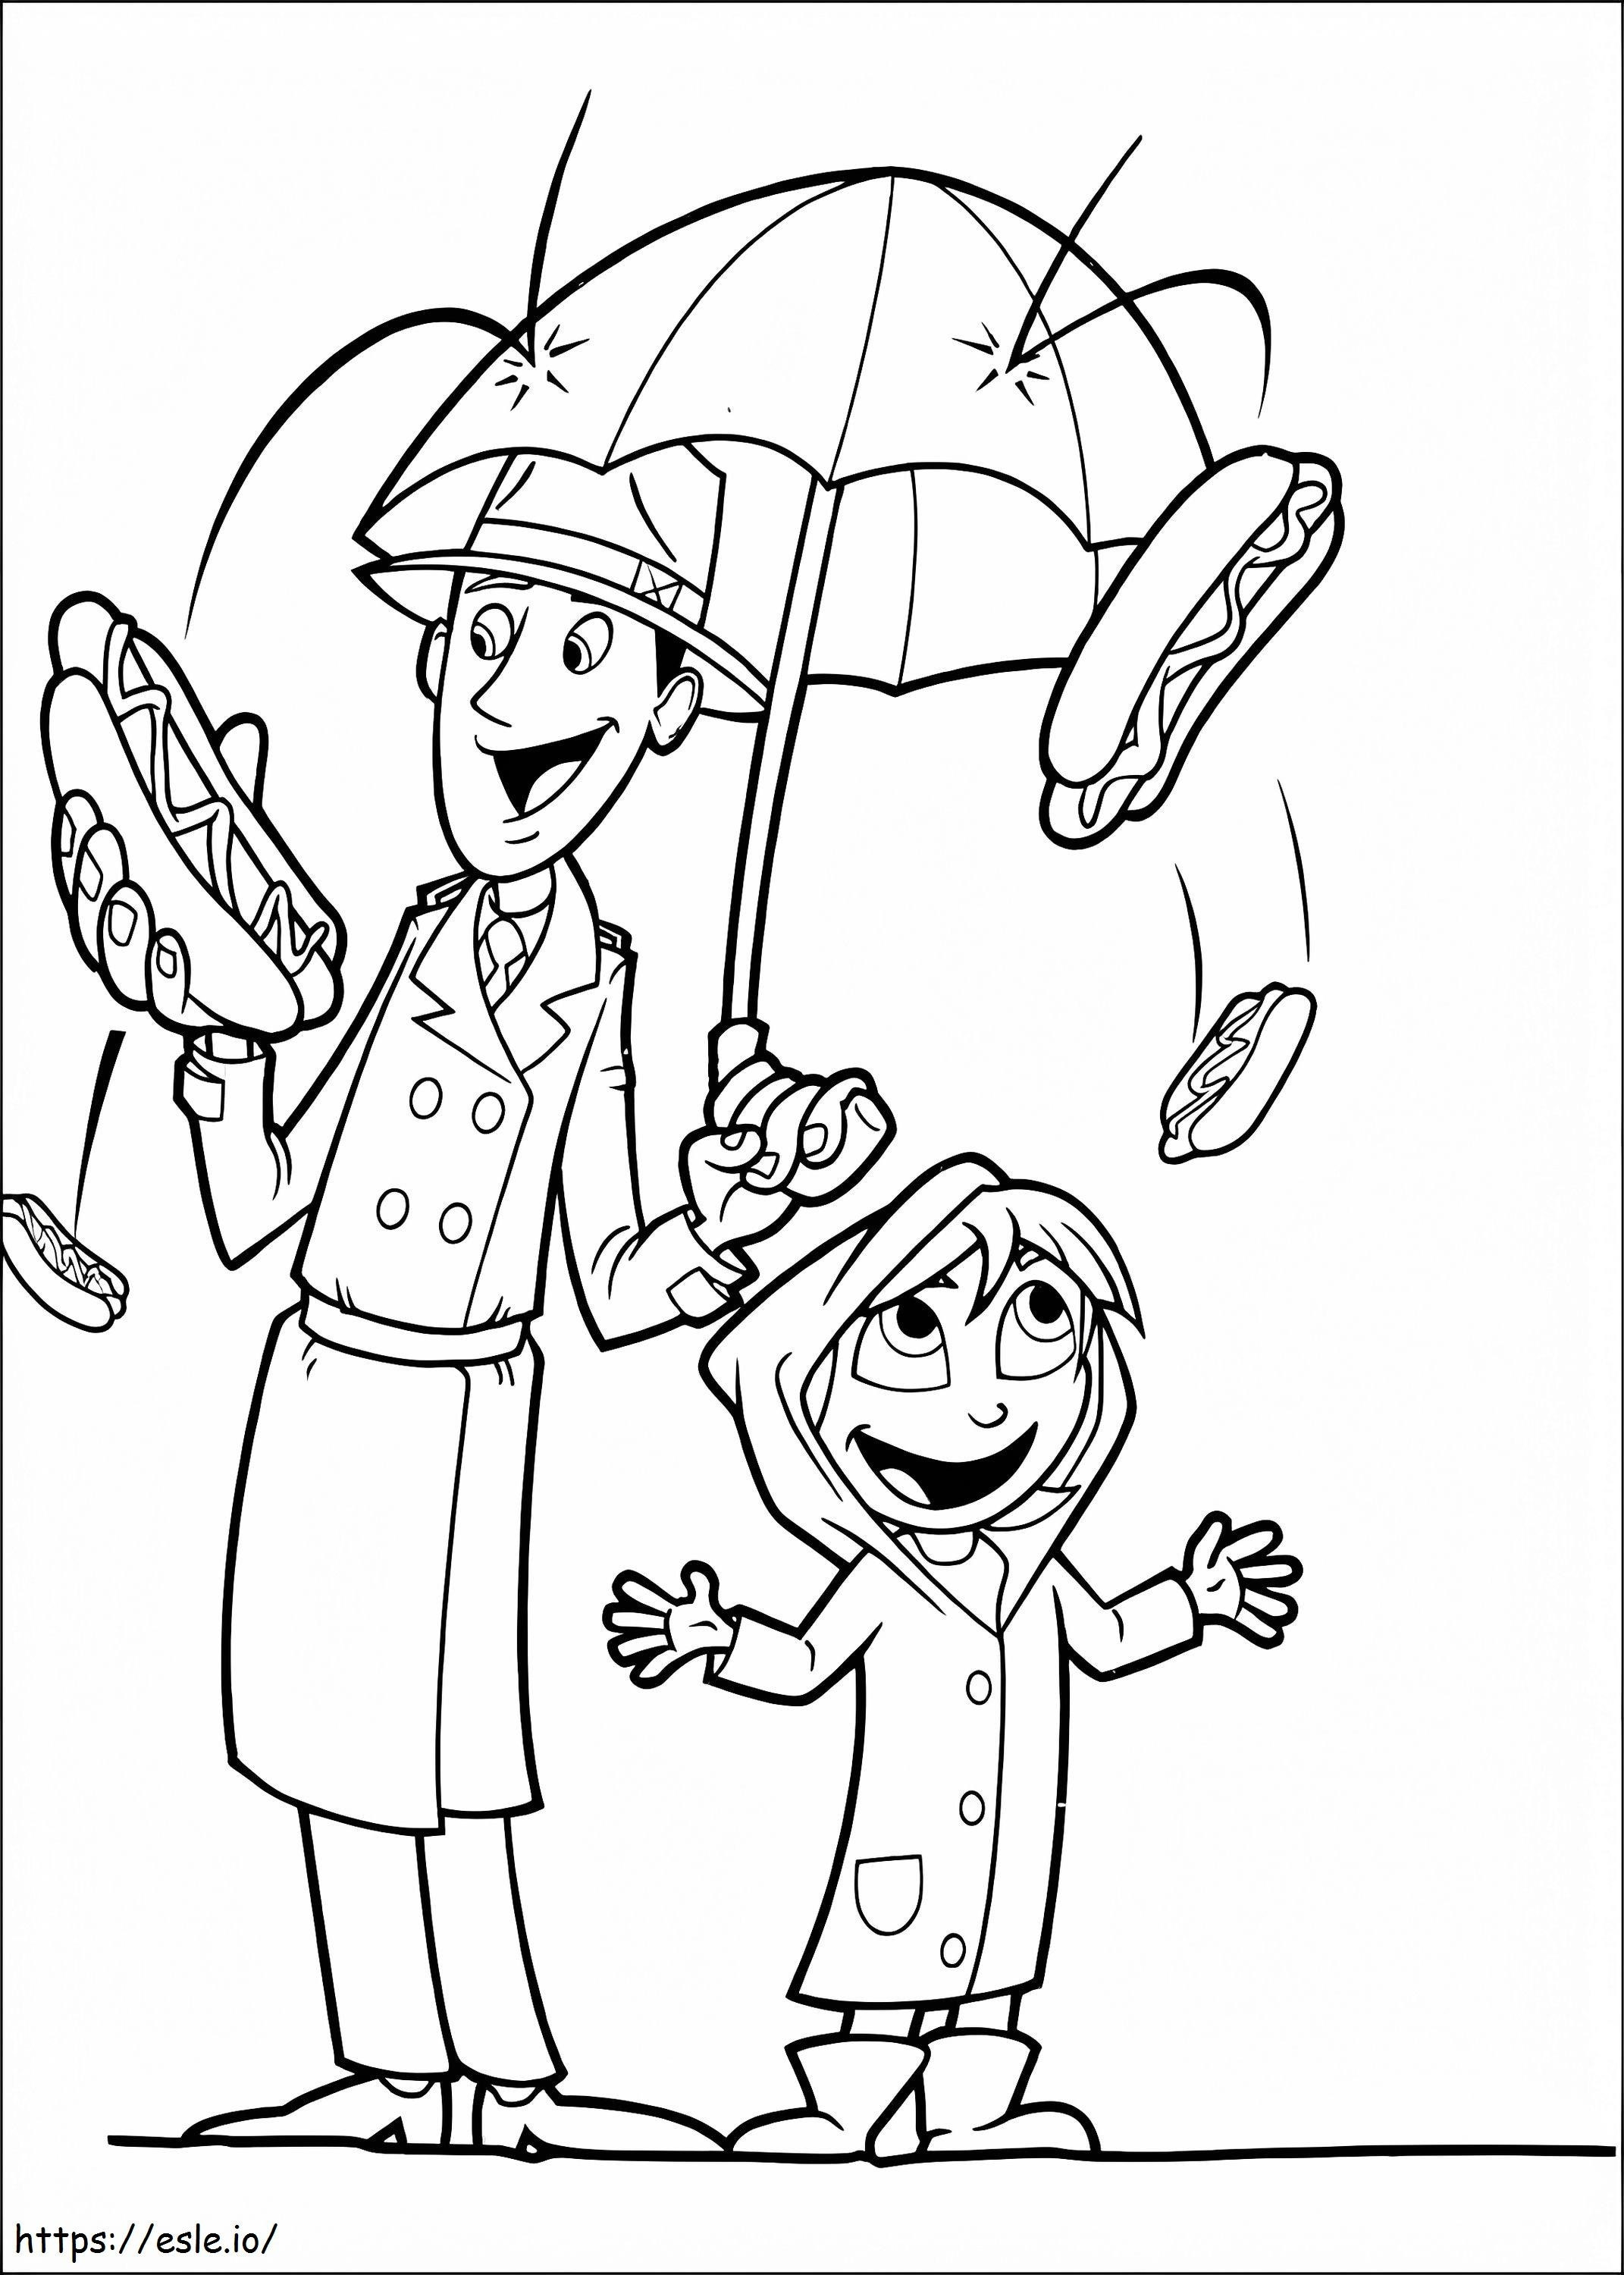 Cloudy With A Chance Of Meatballs 13 coloring page